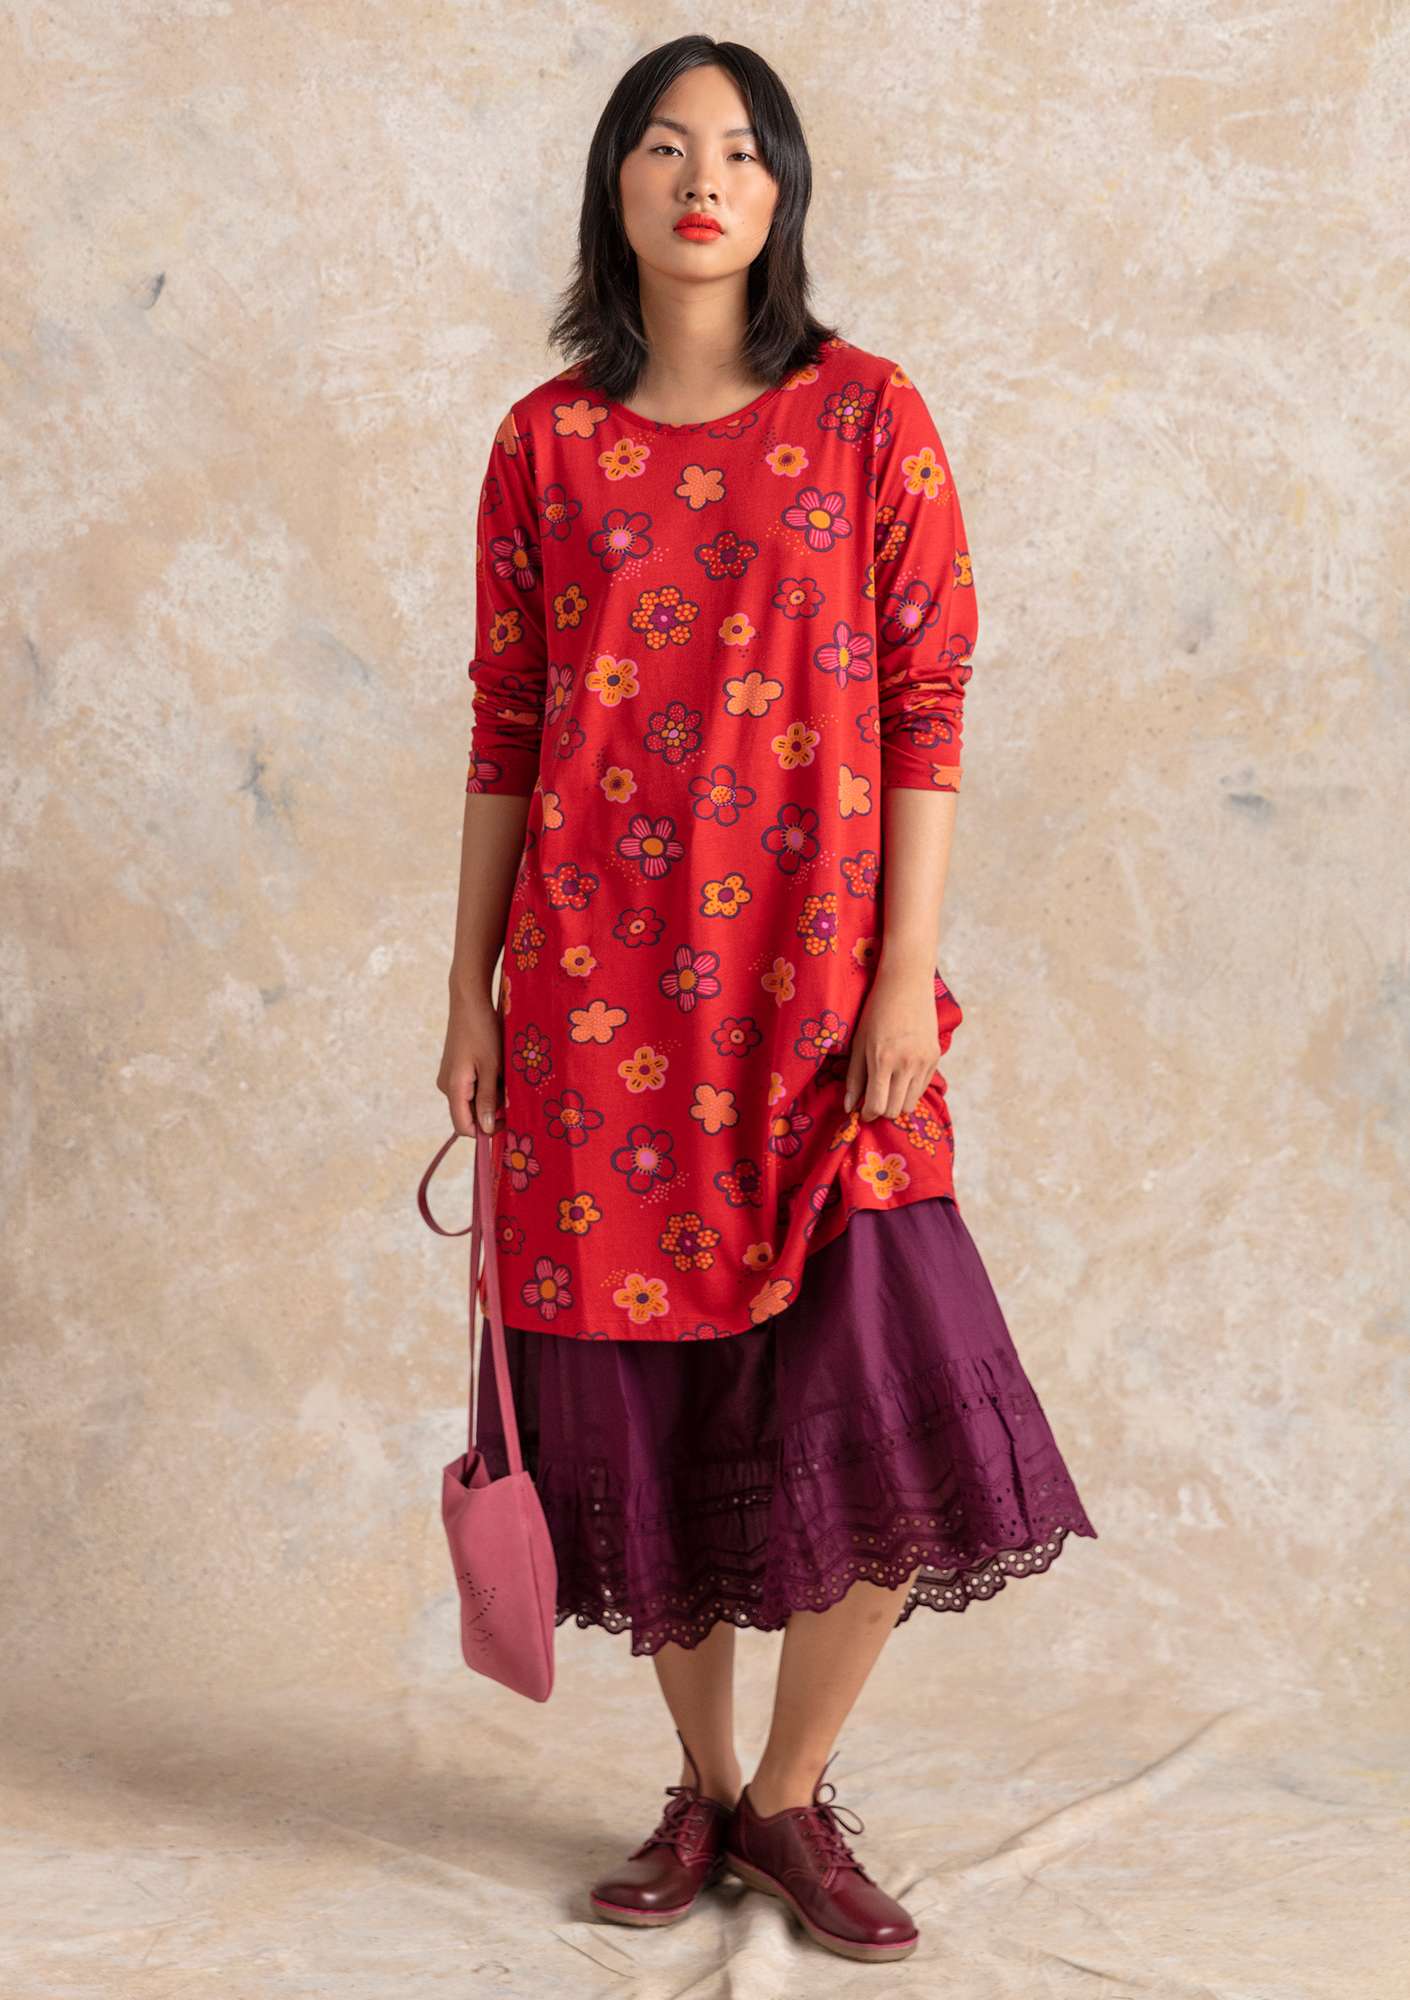 Tricot tuniek Aria parrot red/patterned